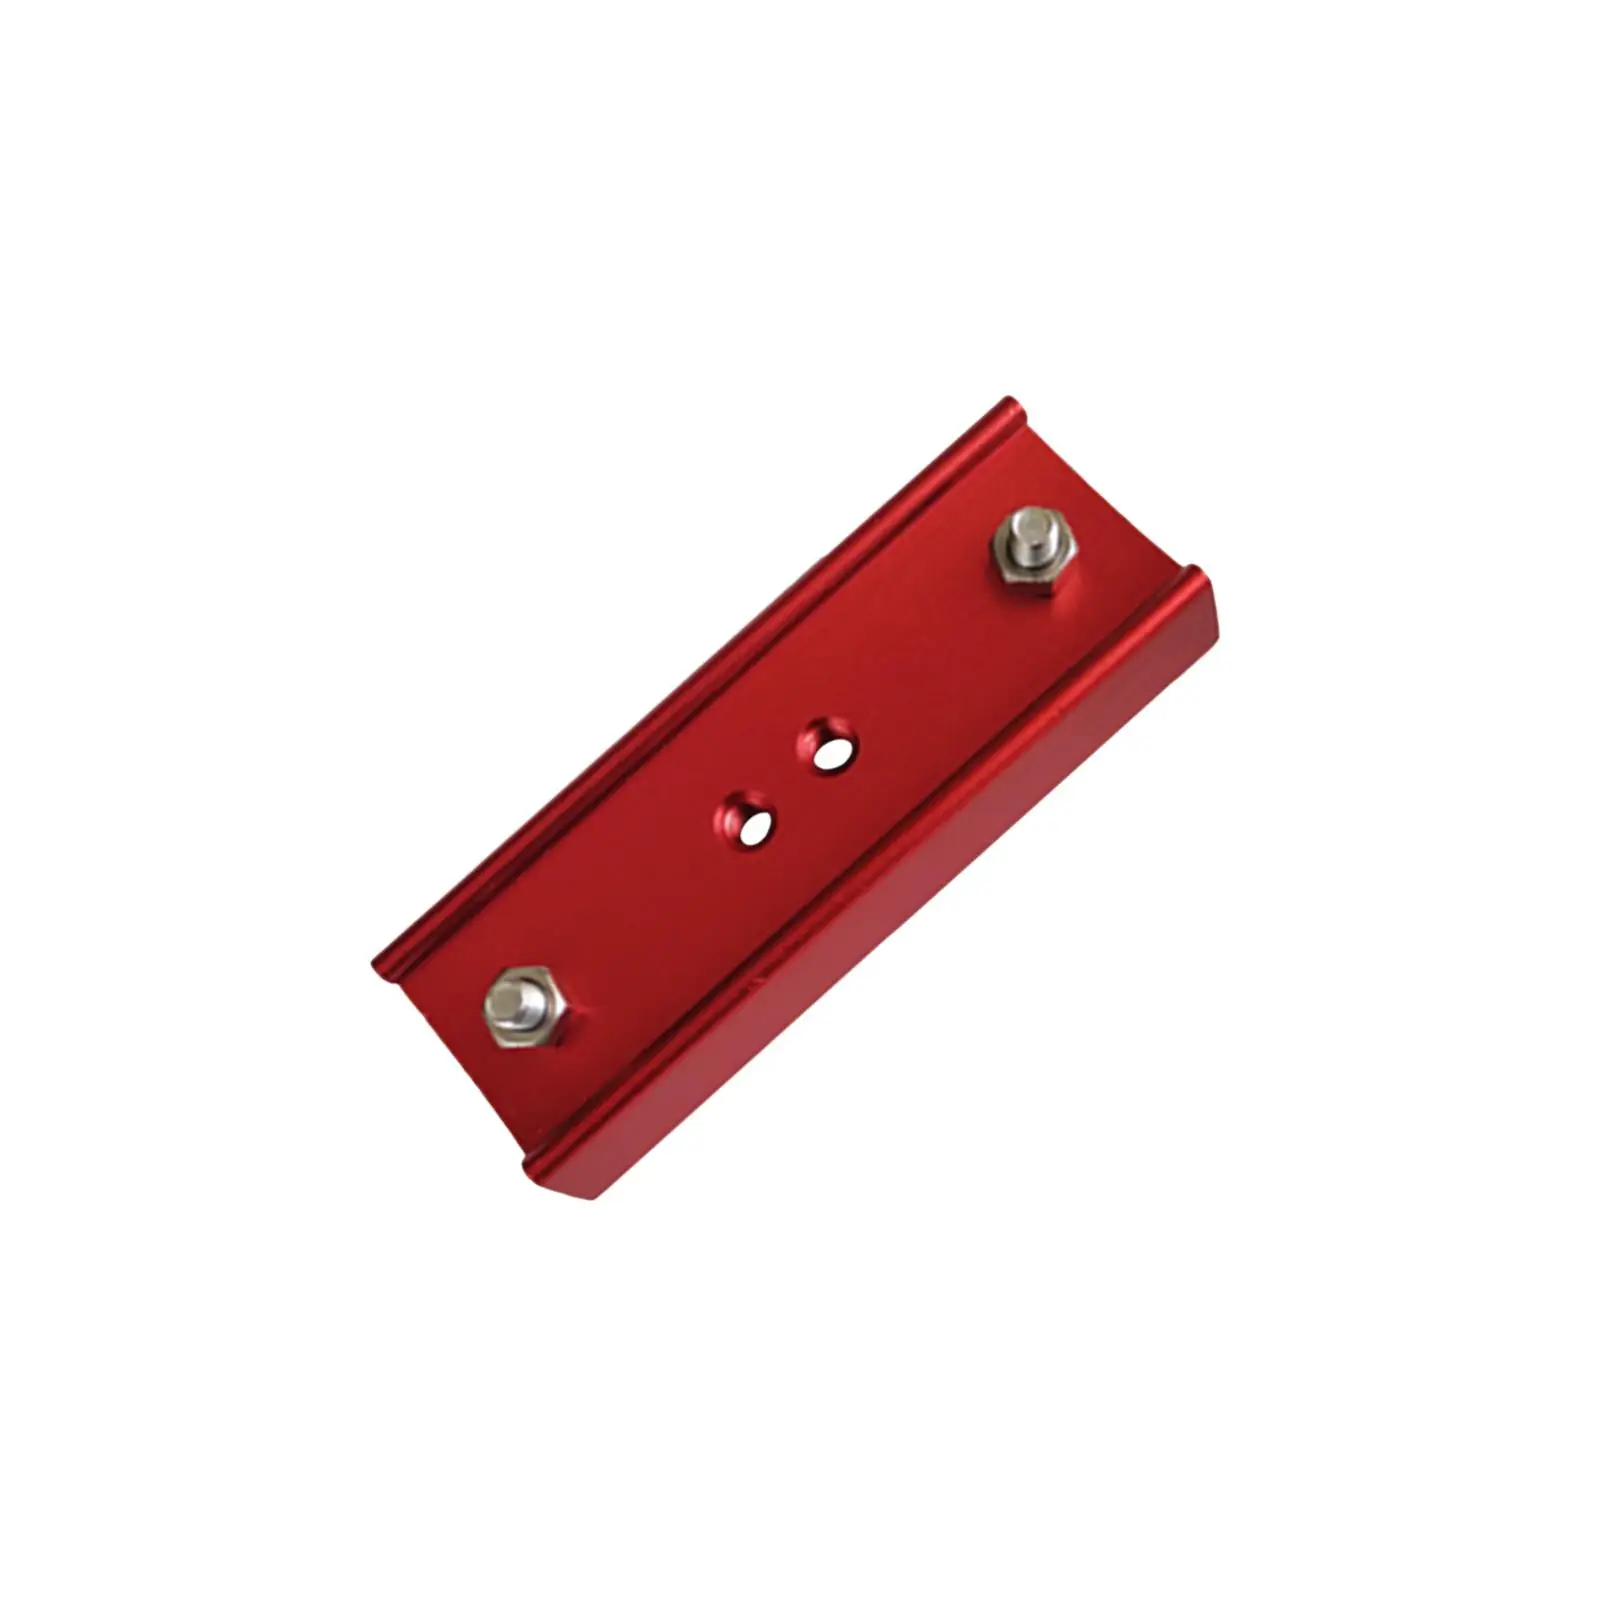 Dovetail Mounting Plate Durable Easily Install Dovetail Mount Plate Adapter